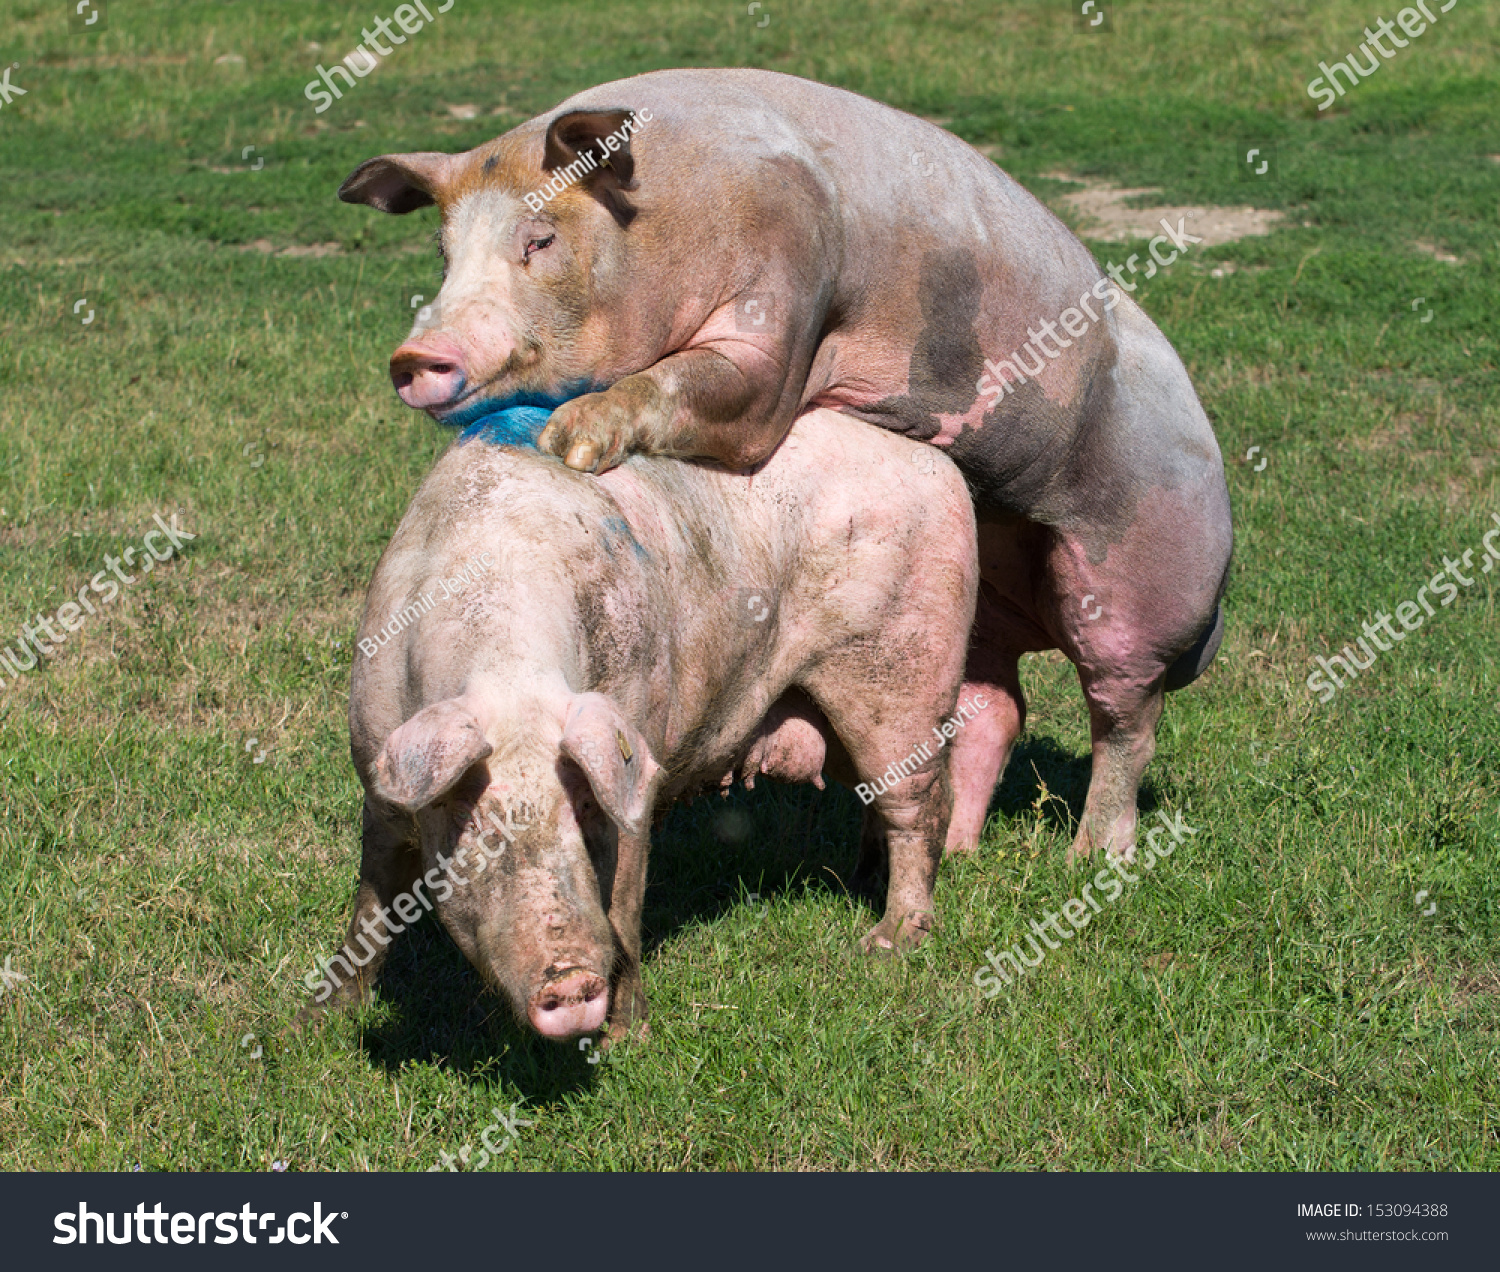 stock-photo-pigs-mating-on-farm-15309438